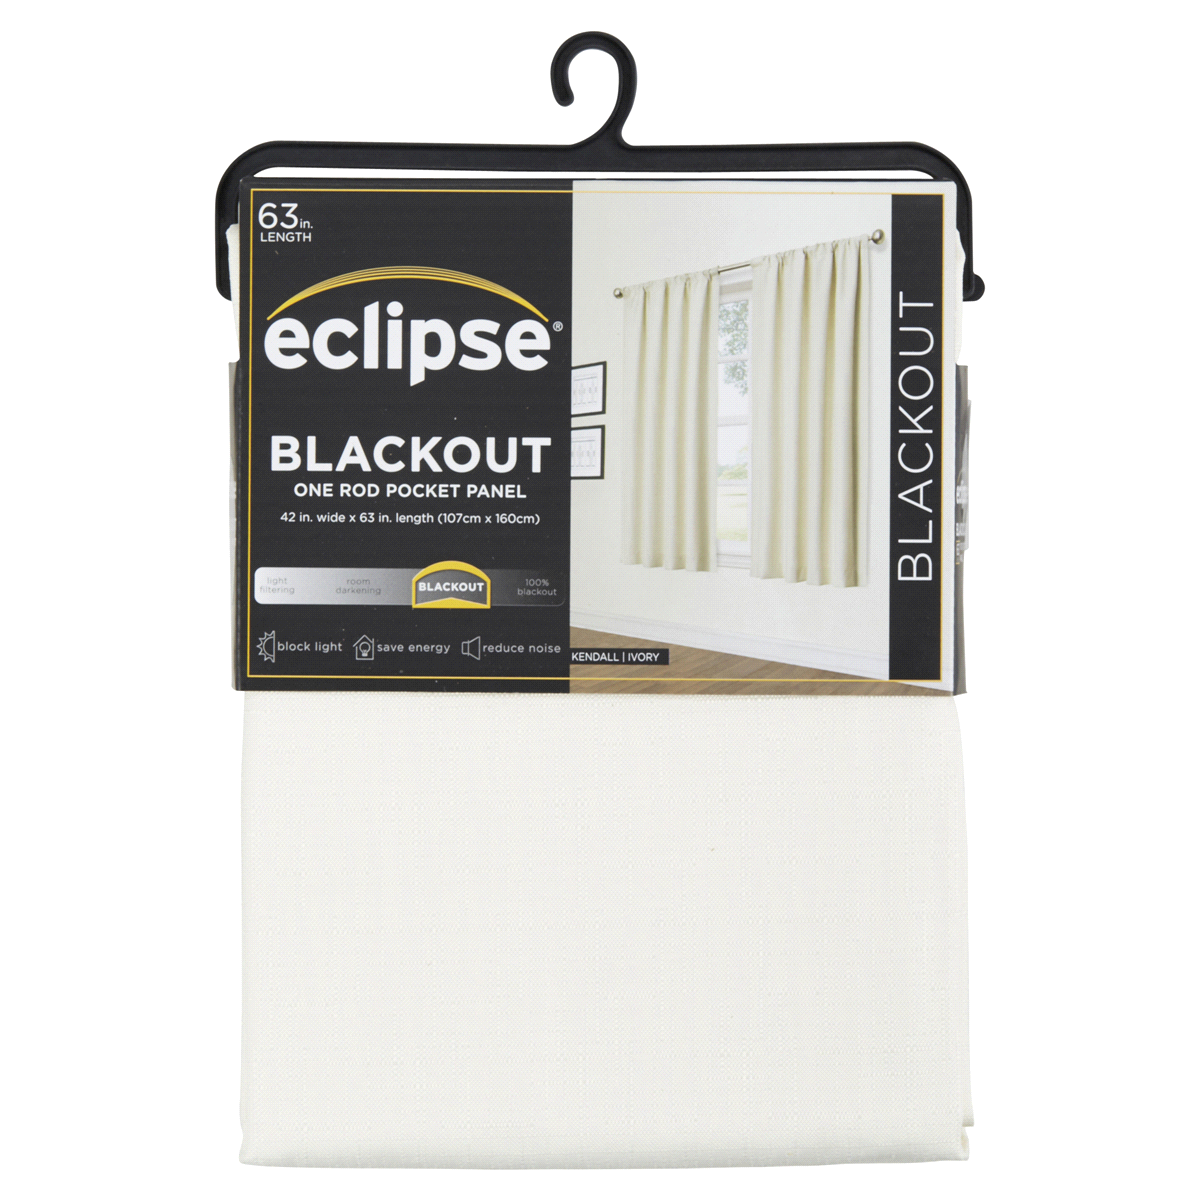 slide 1 of 29, Eclipse Kendall Blackout Window Curtain Panel - 63" - Ivory, 1 ct